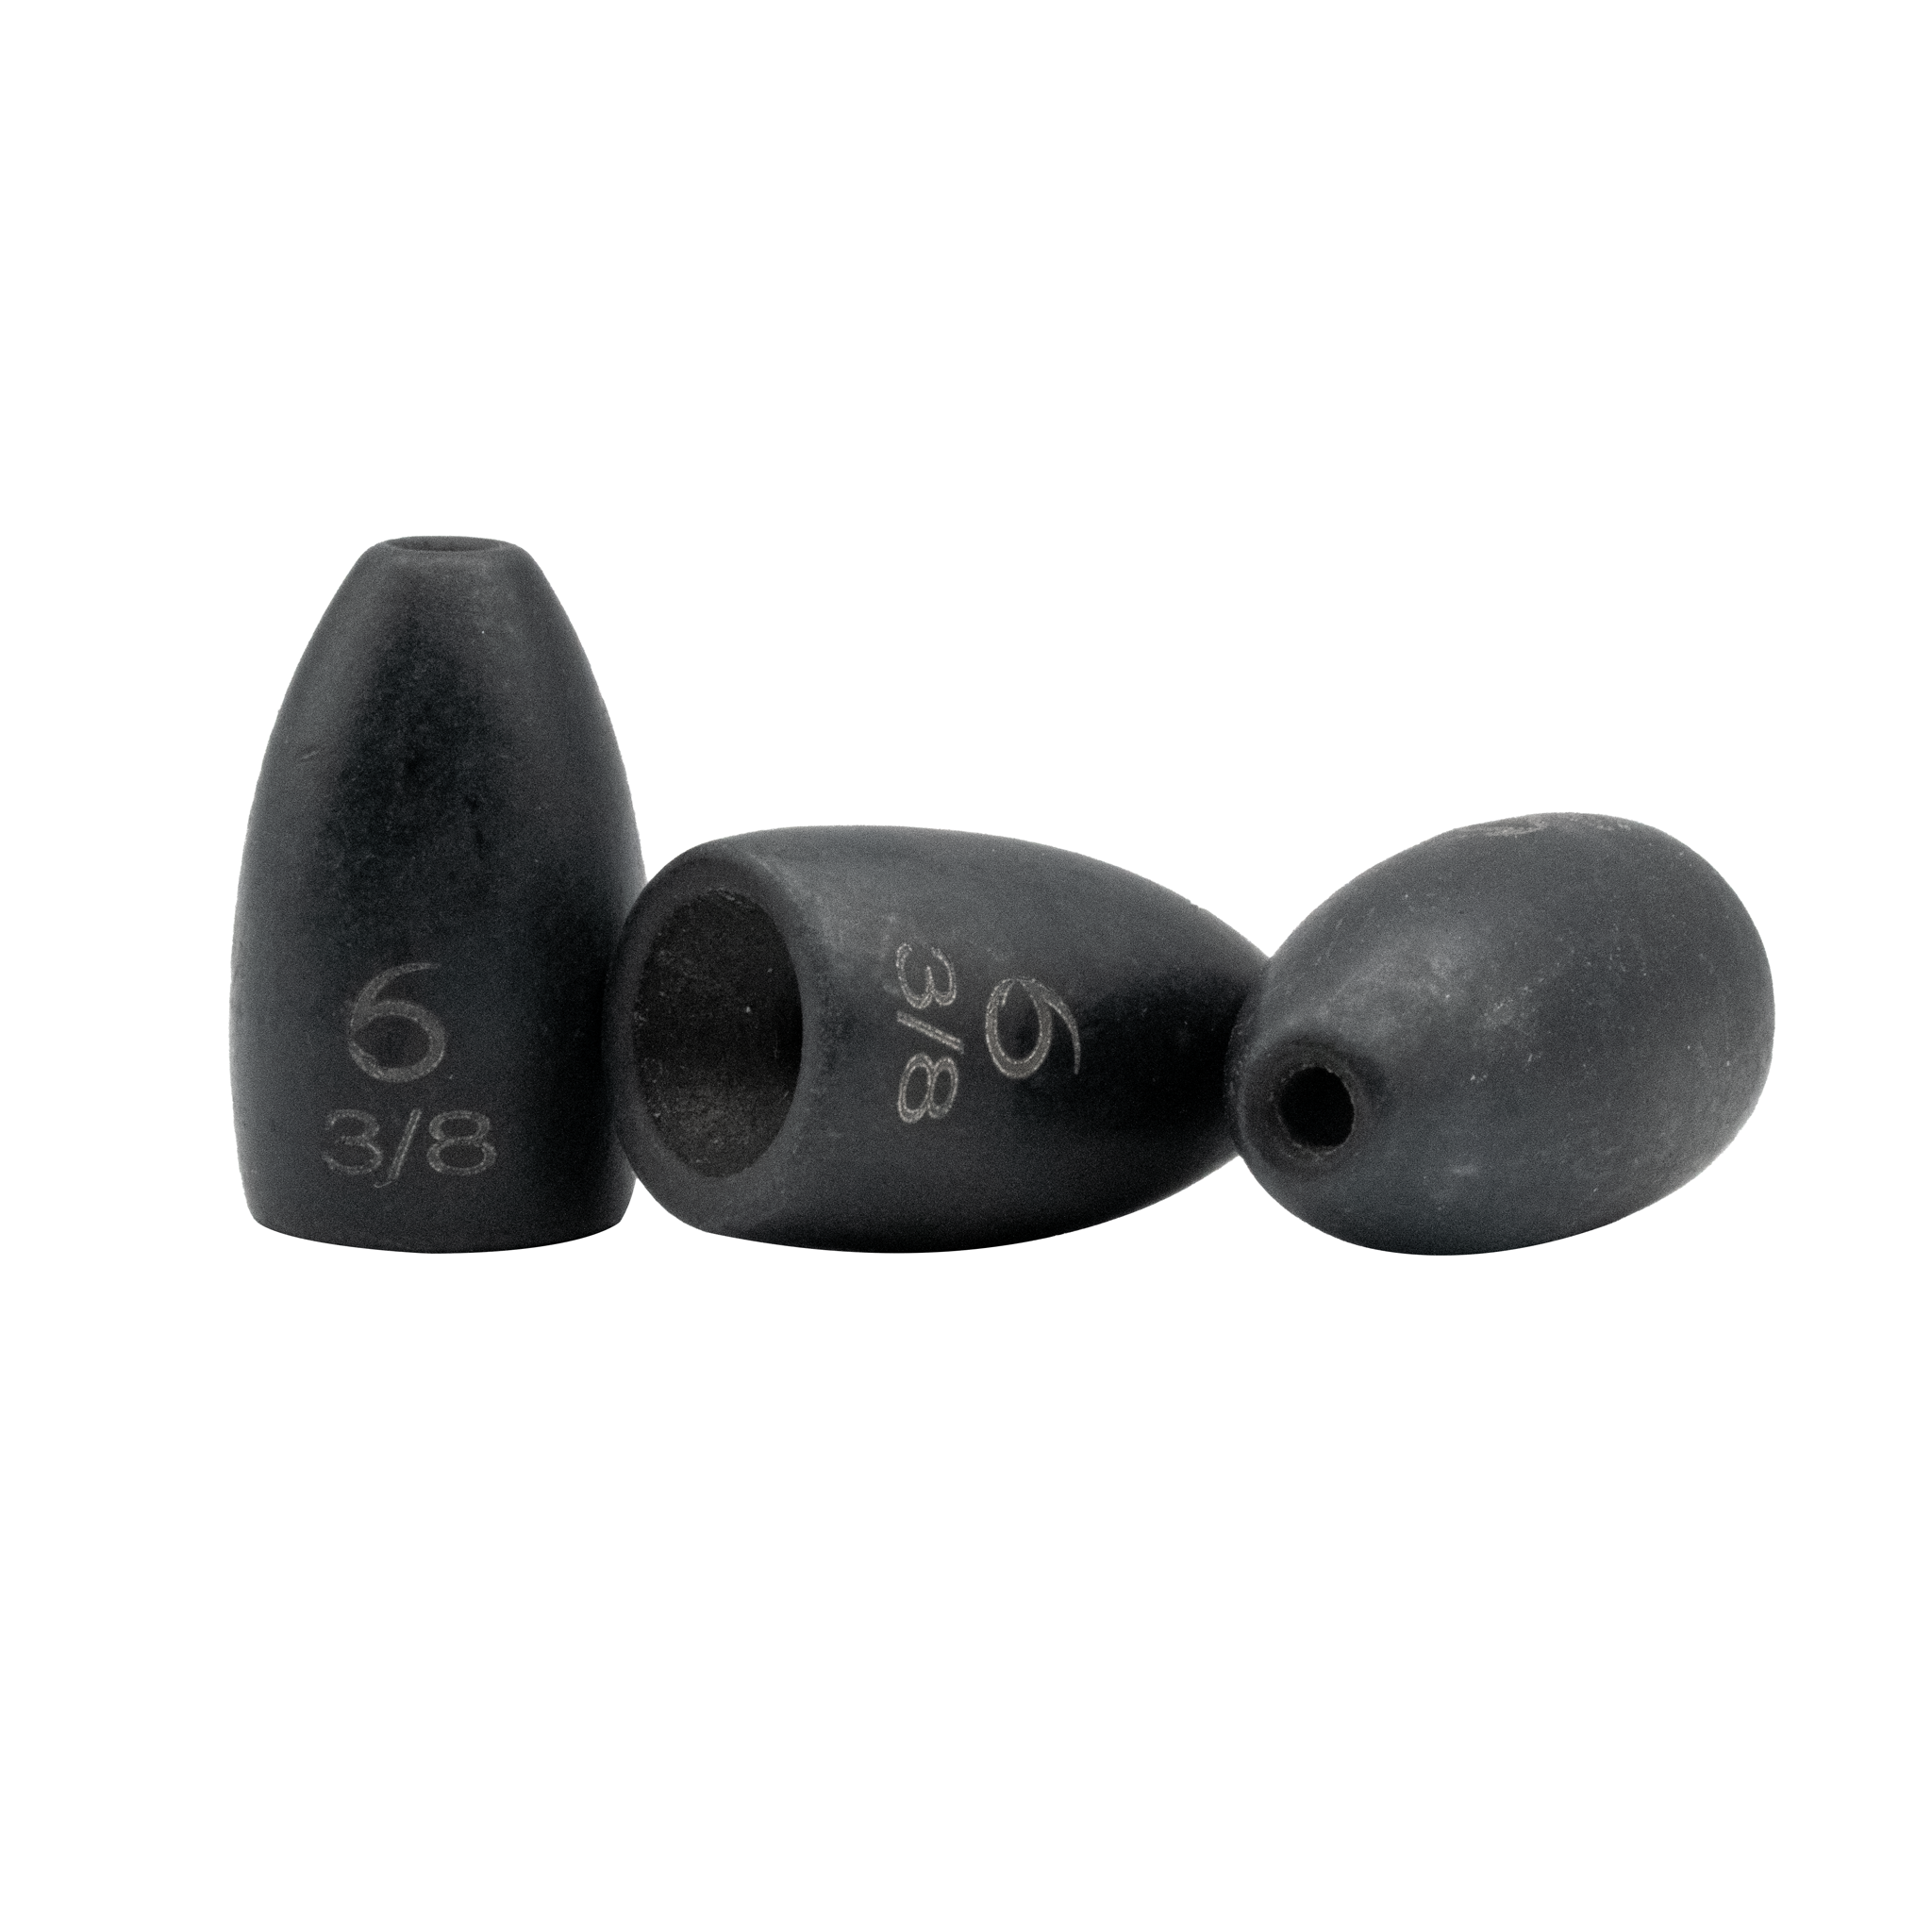 6th Sense Peg-X Weight Stoppers